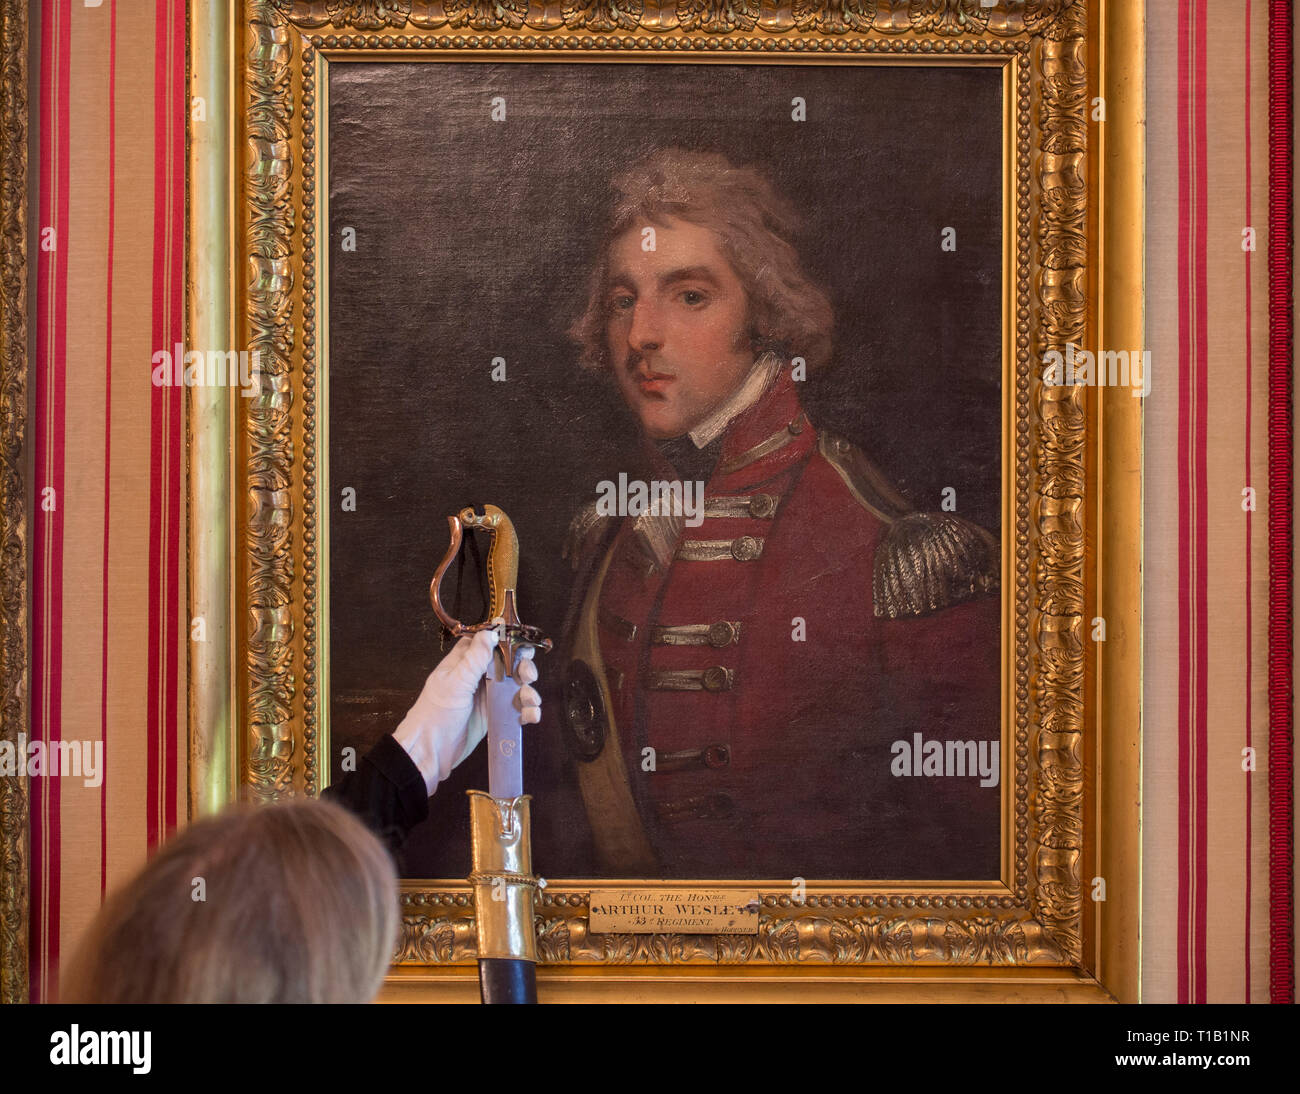 Apsley House, London, UK. 25 March, 2019. ‘Young Wellington in India’ exhibition explores the early years and provide insights into the man known globally as the 1st Duke of Wellington, who later defeated Bonaparte at Waterloo in 1815. The exhibition runs from 30 March - 3 November 2019. Image: Josephine Oxley, Keeper of the Wellington Collection, unsheaths an Indian sword from Wellington’s collection, alongside a portrait of Arthur Wellesley in the 33rd Regiment uniform. Credit: Malcolm Park/Alamy Live News. Stock Photo